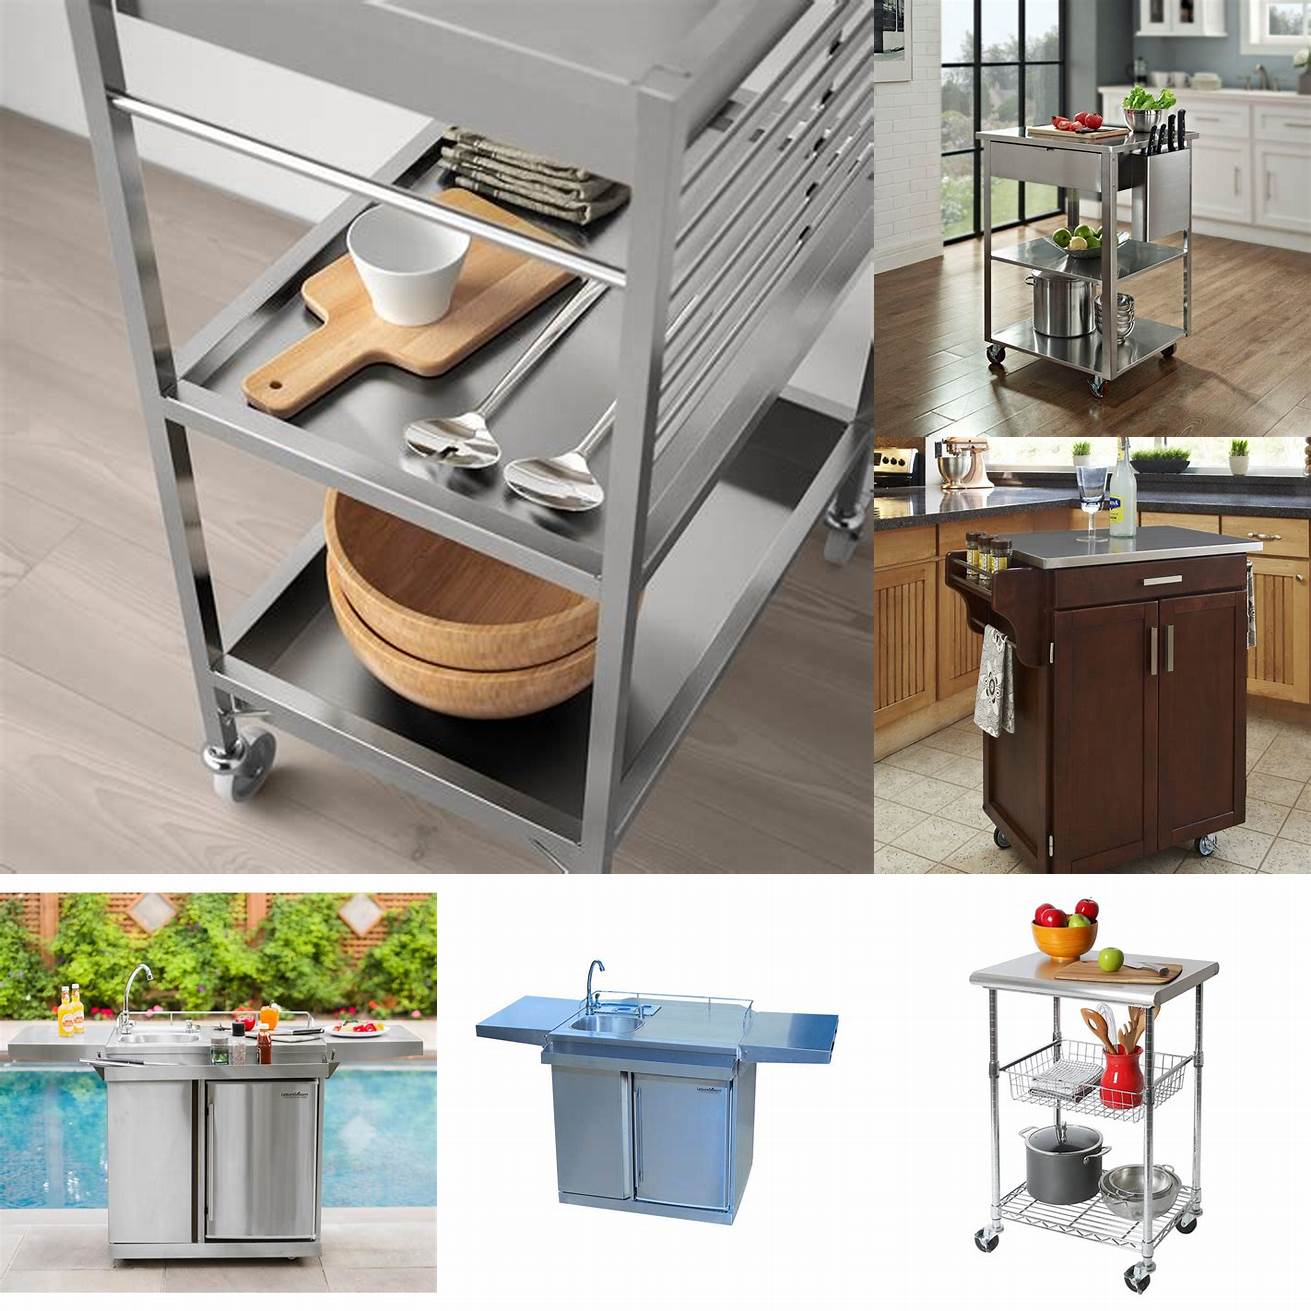 A stainless steel kitchen cart with a built-in sink